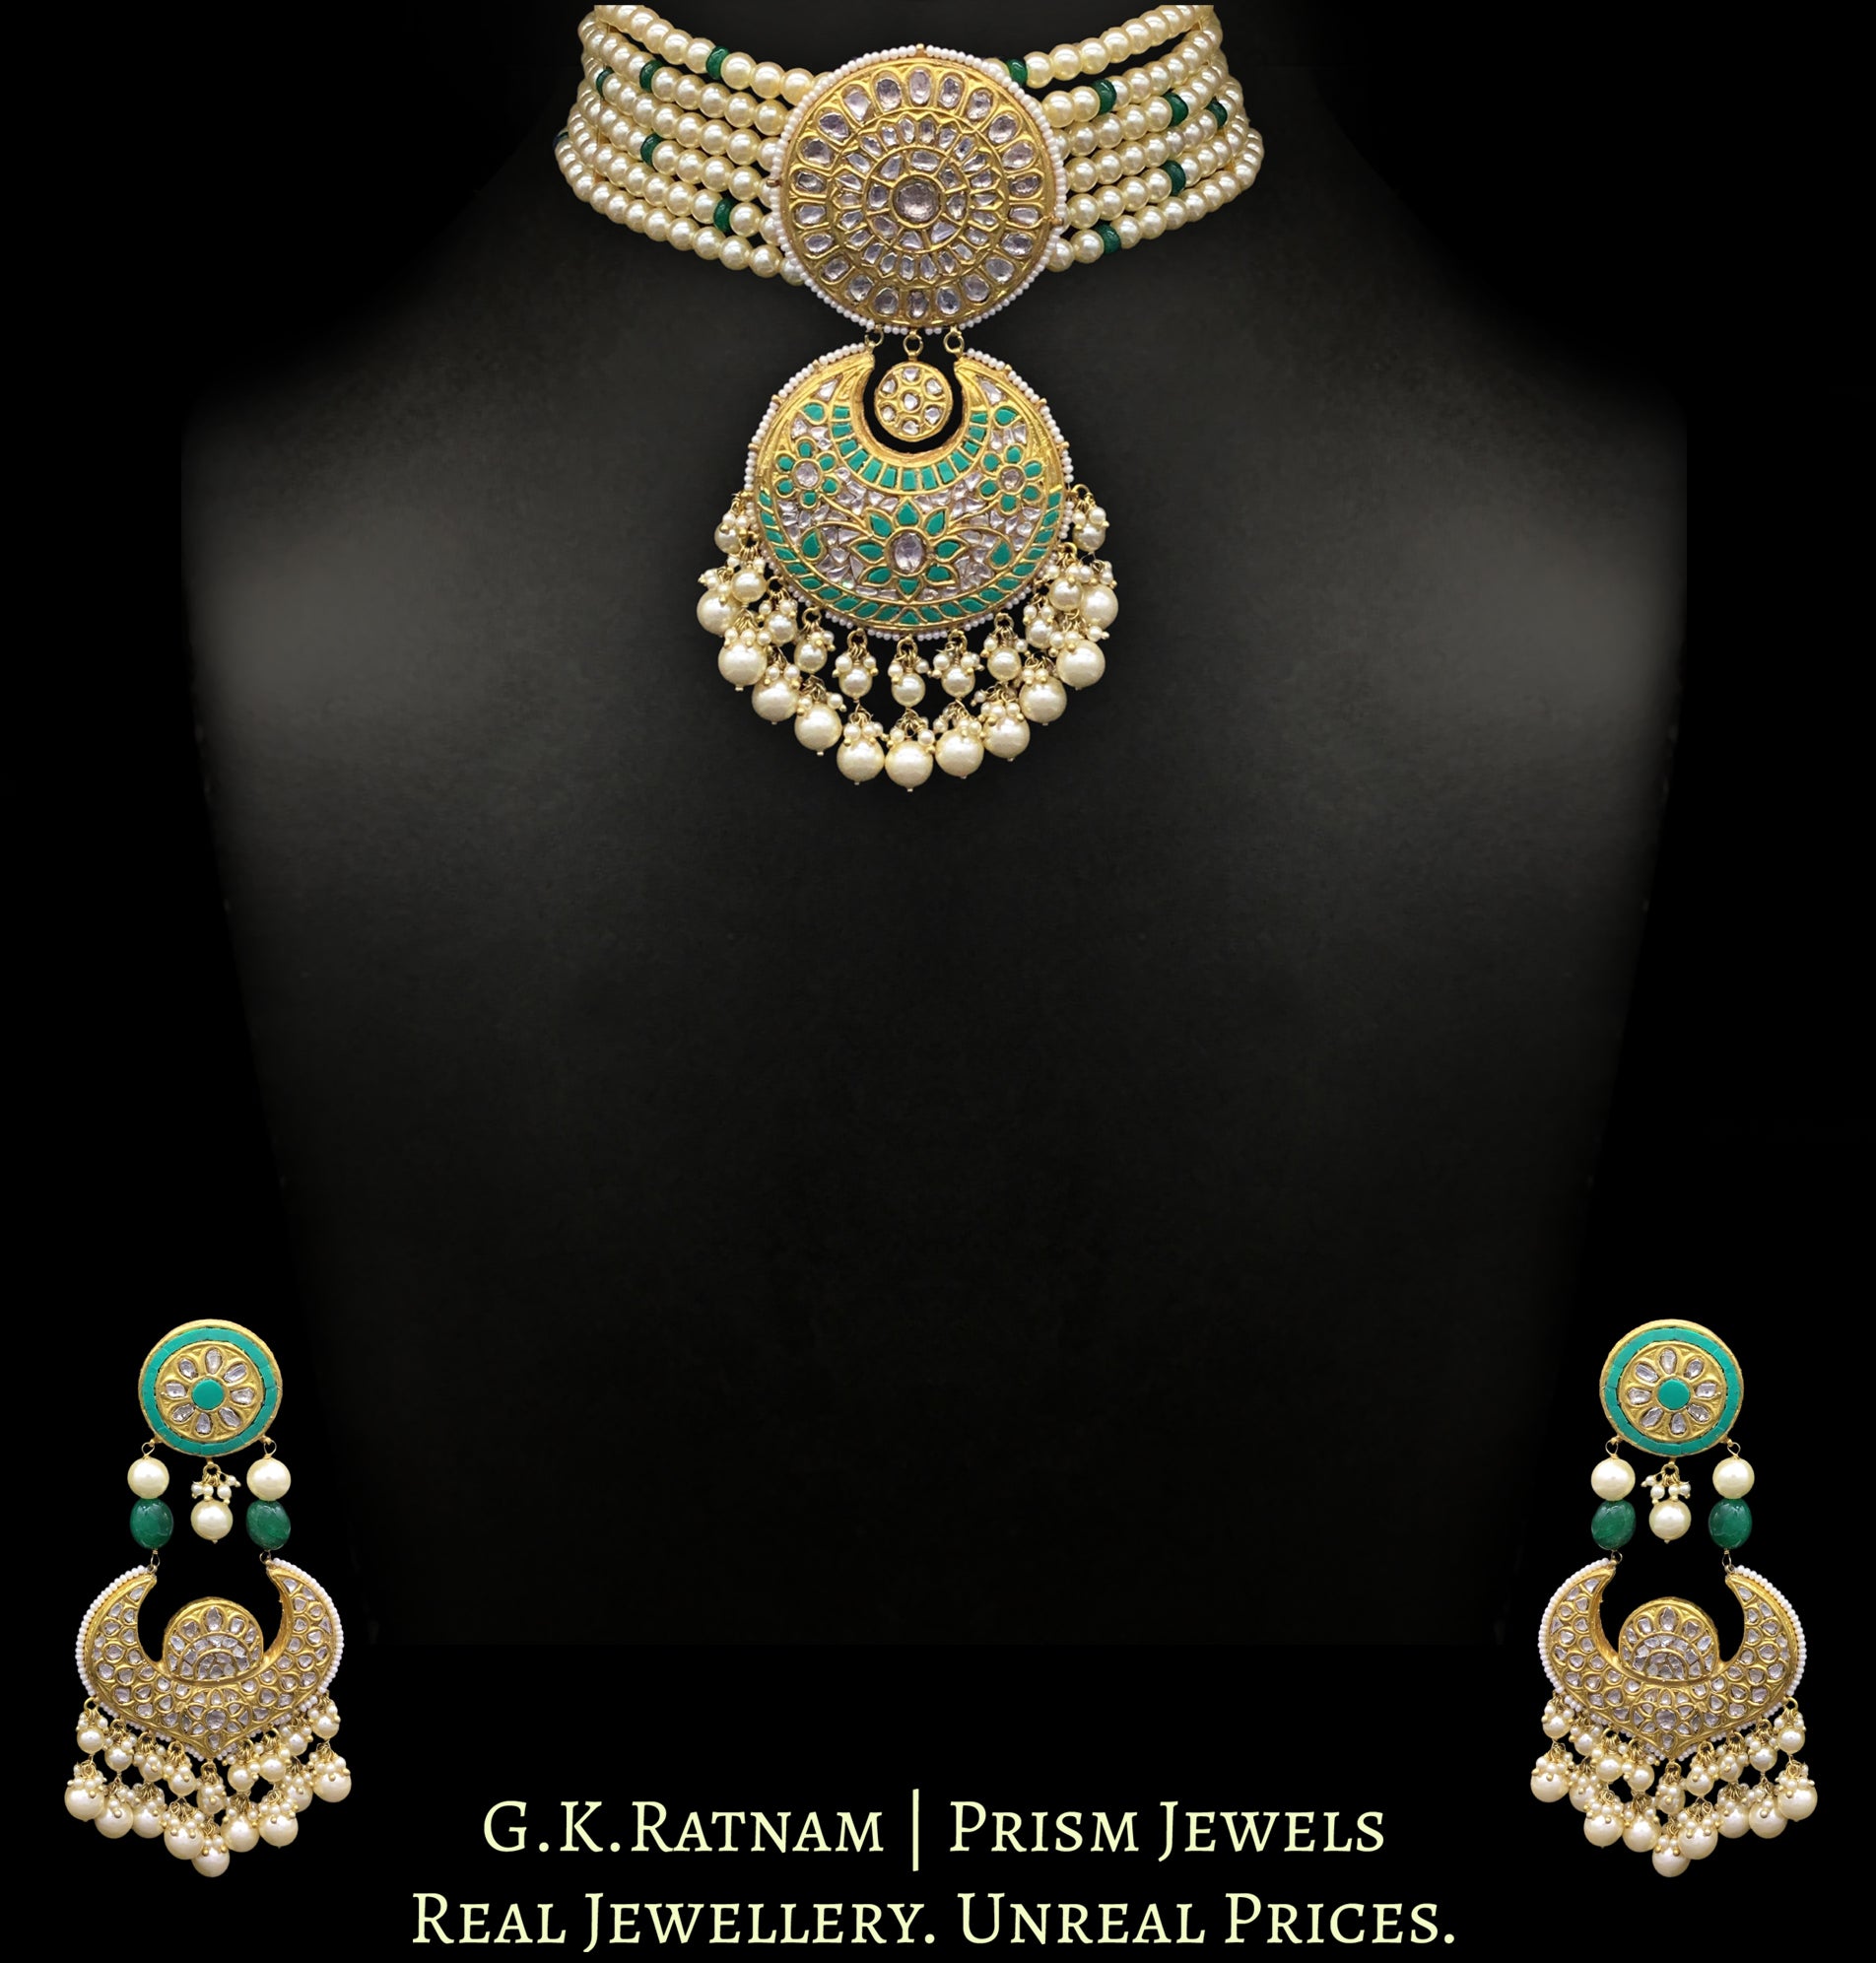 23k Gold and Diamond Polki Turquoise Choker Necklace Set delicately strung in lustrous pearls